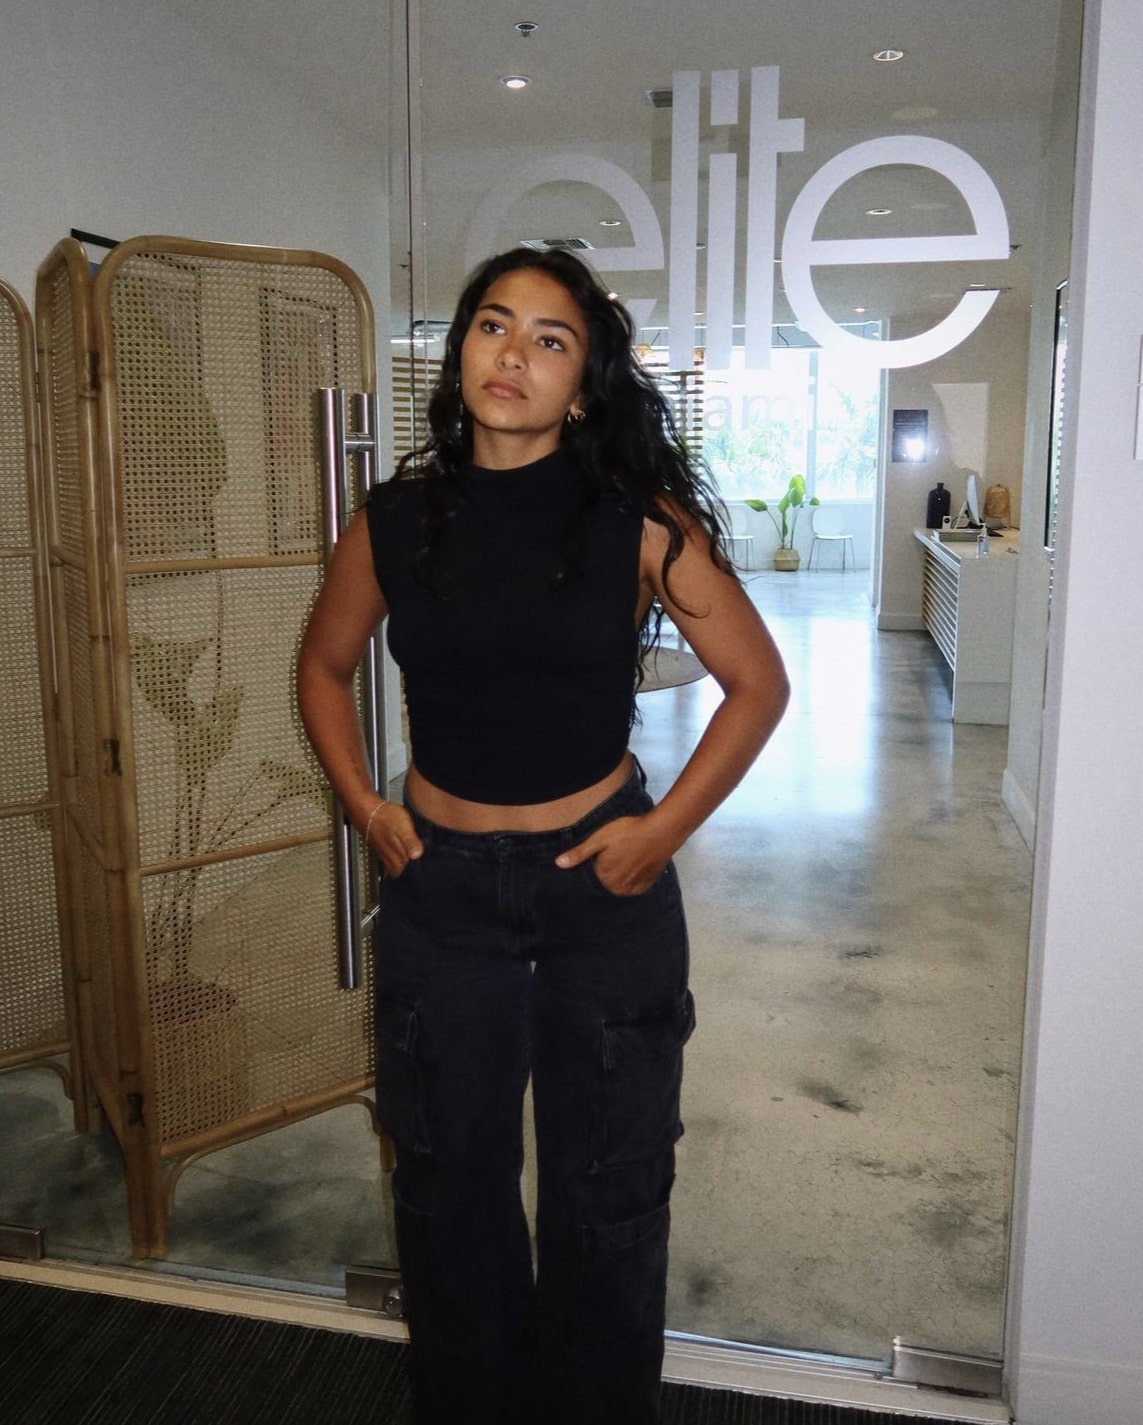 Girl standing in black jeans and black top in front of glass door with opaque text that reads "Elite"